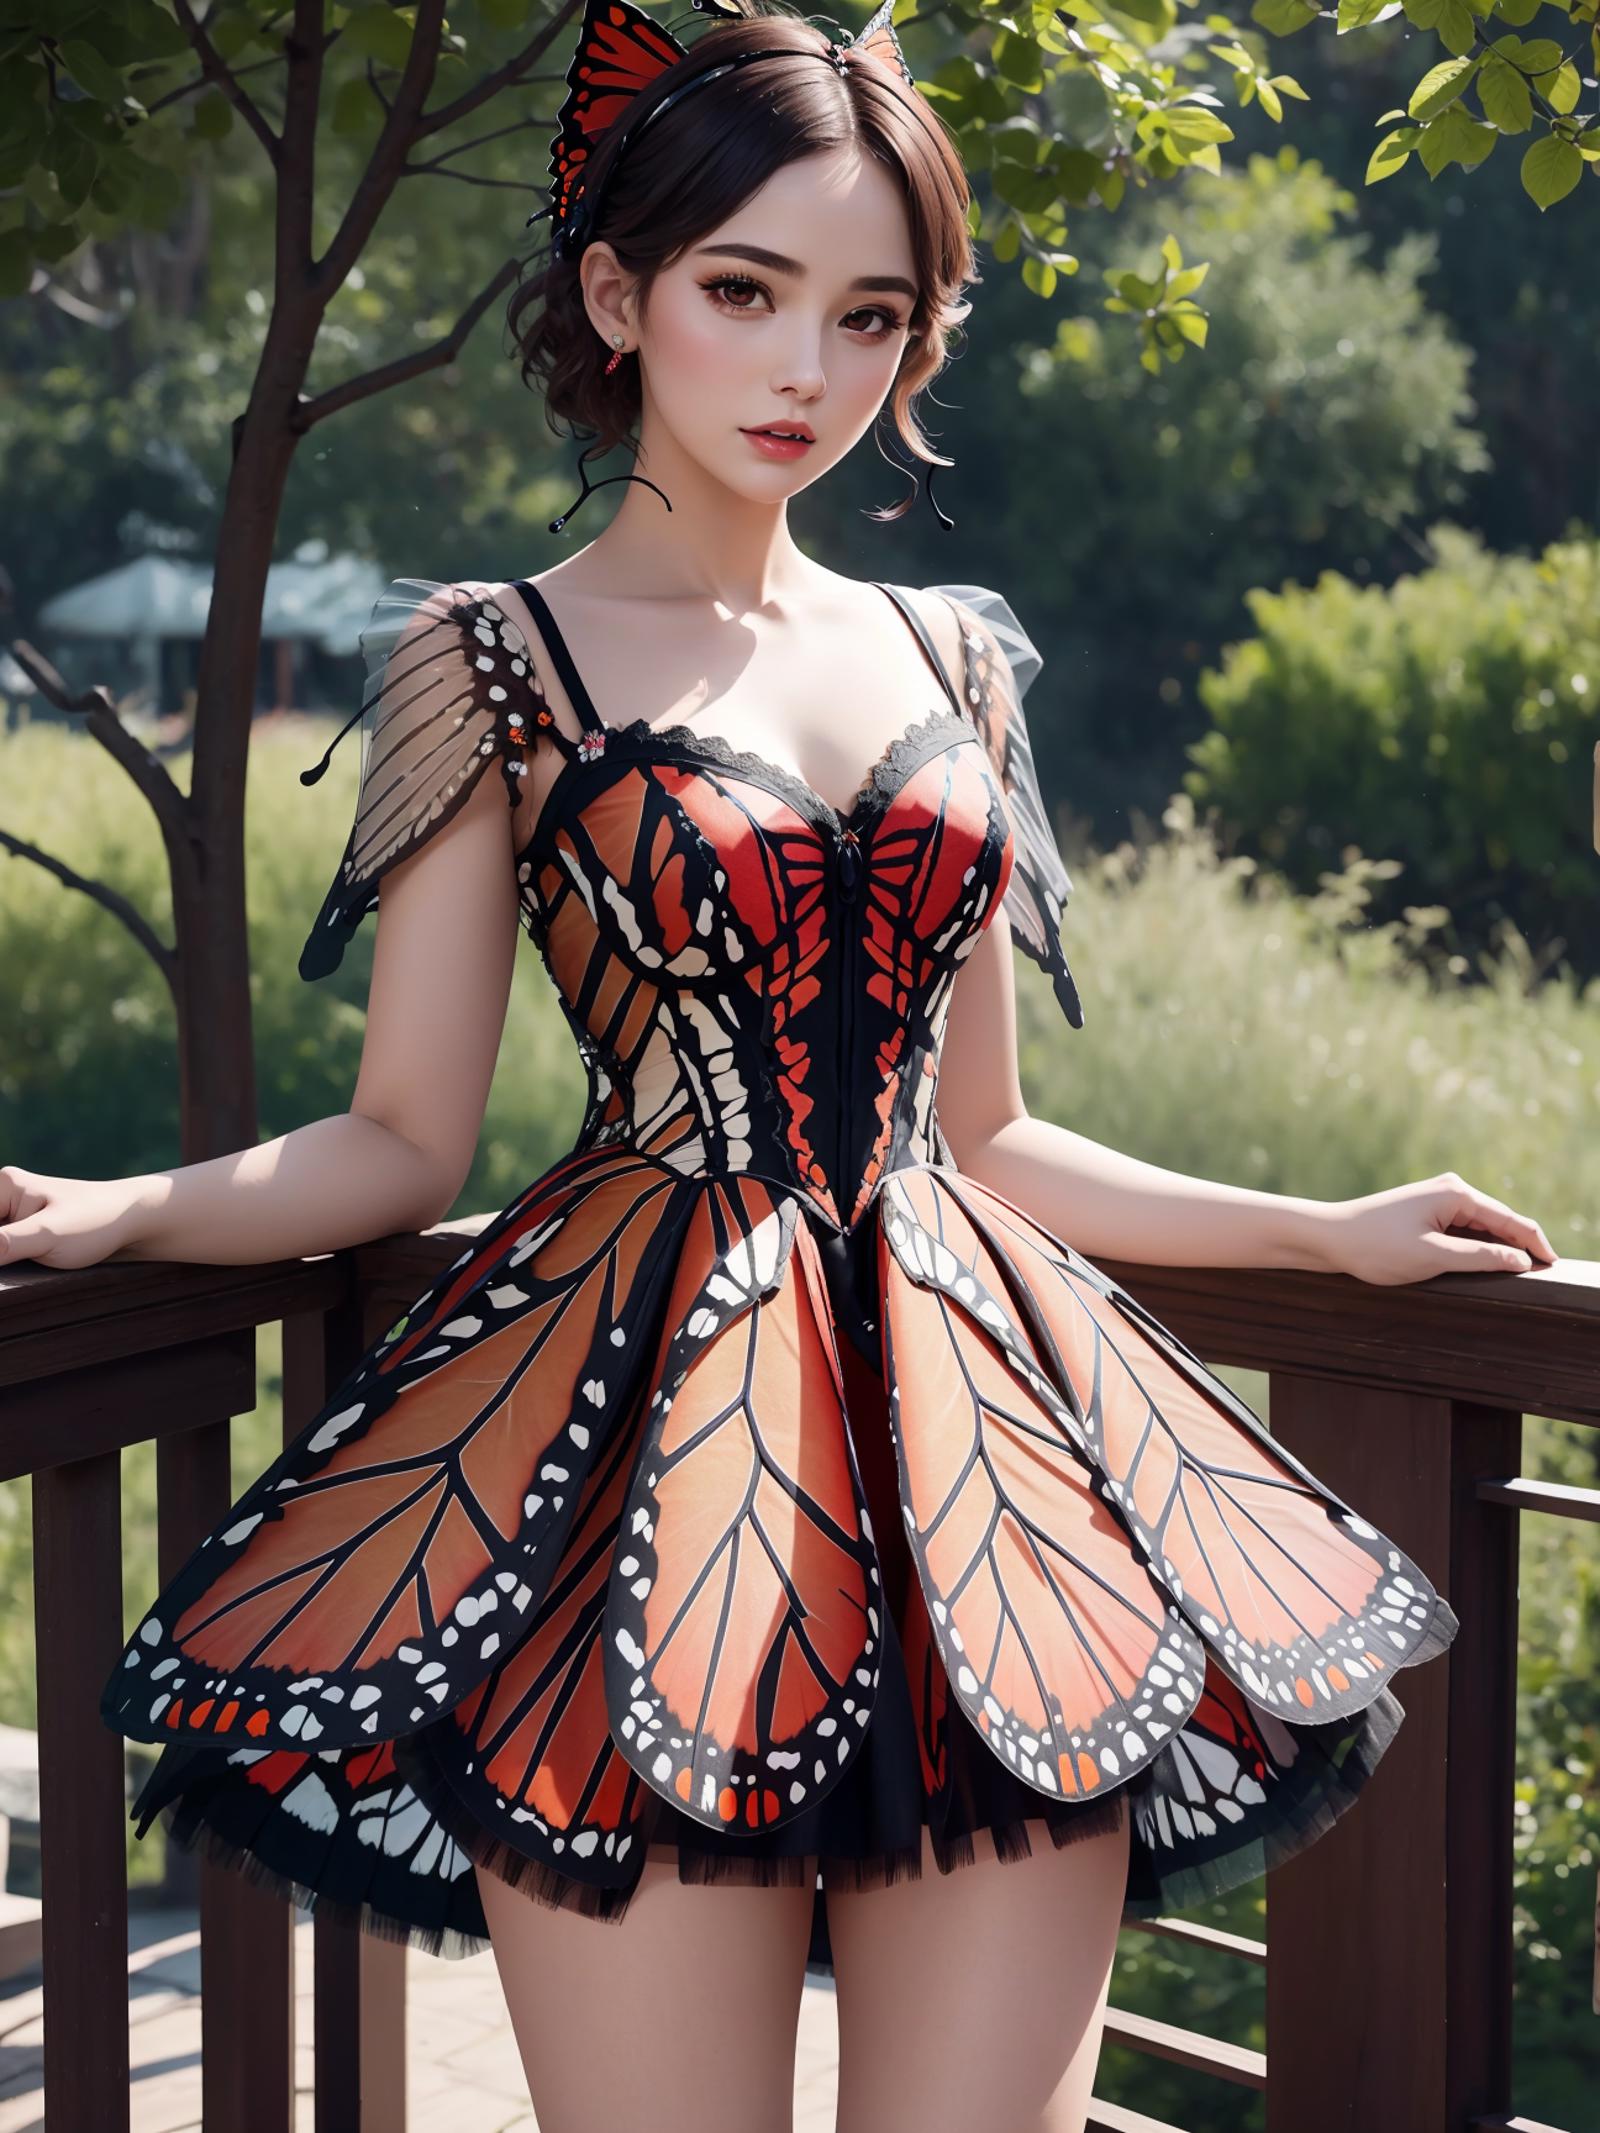 Butterfly Dress image by n15g